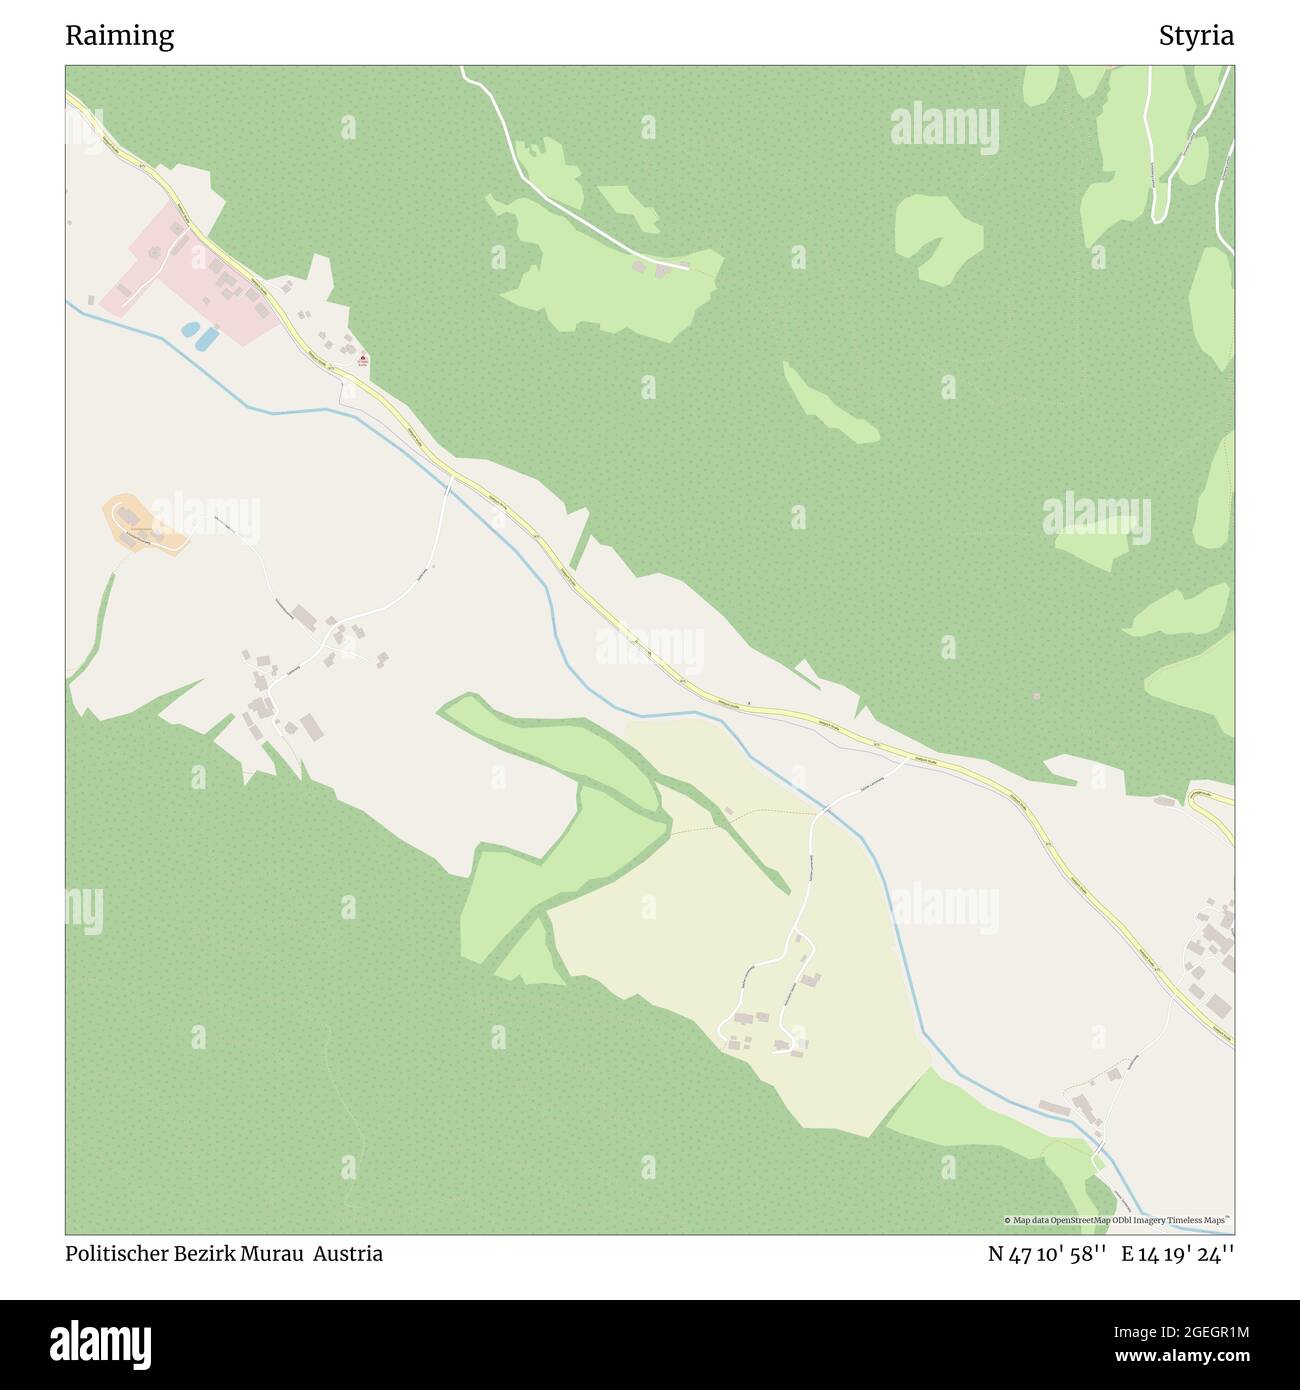 Raiming, Politischer Bezirk Murau, Austria, Styria, N 47 10' 58'', E 14 19' 24'', map, Timeless Map published in 2021. Travelers, explorers and adventurers like Florence Nightingale, David Livingstone, Ernest Shackleton, Lewis and Clark and Sherlock Holmes relied on maps to plan travels to the world's most remote corners, Timeless Maps is mapping most locations on the globe, showing the achievement of great dreams Stock Photo